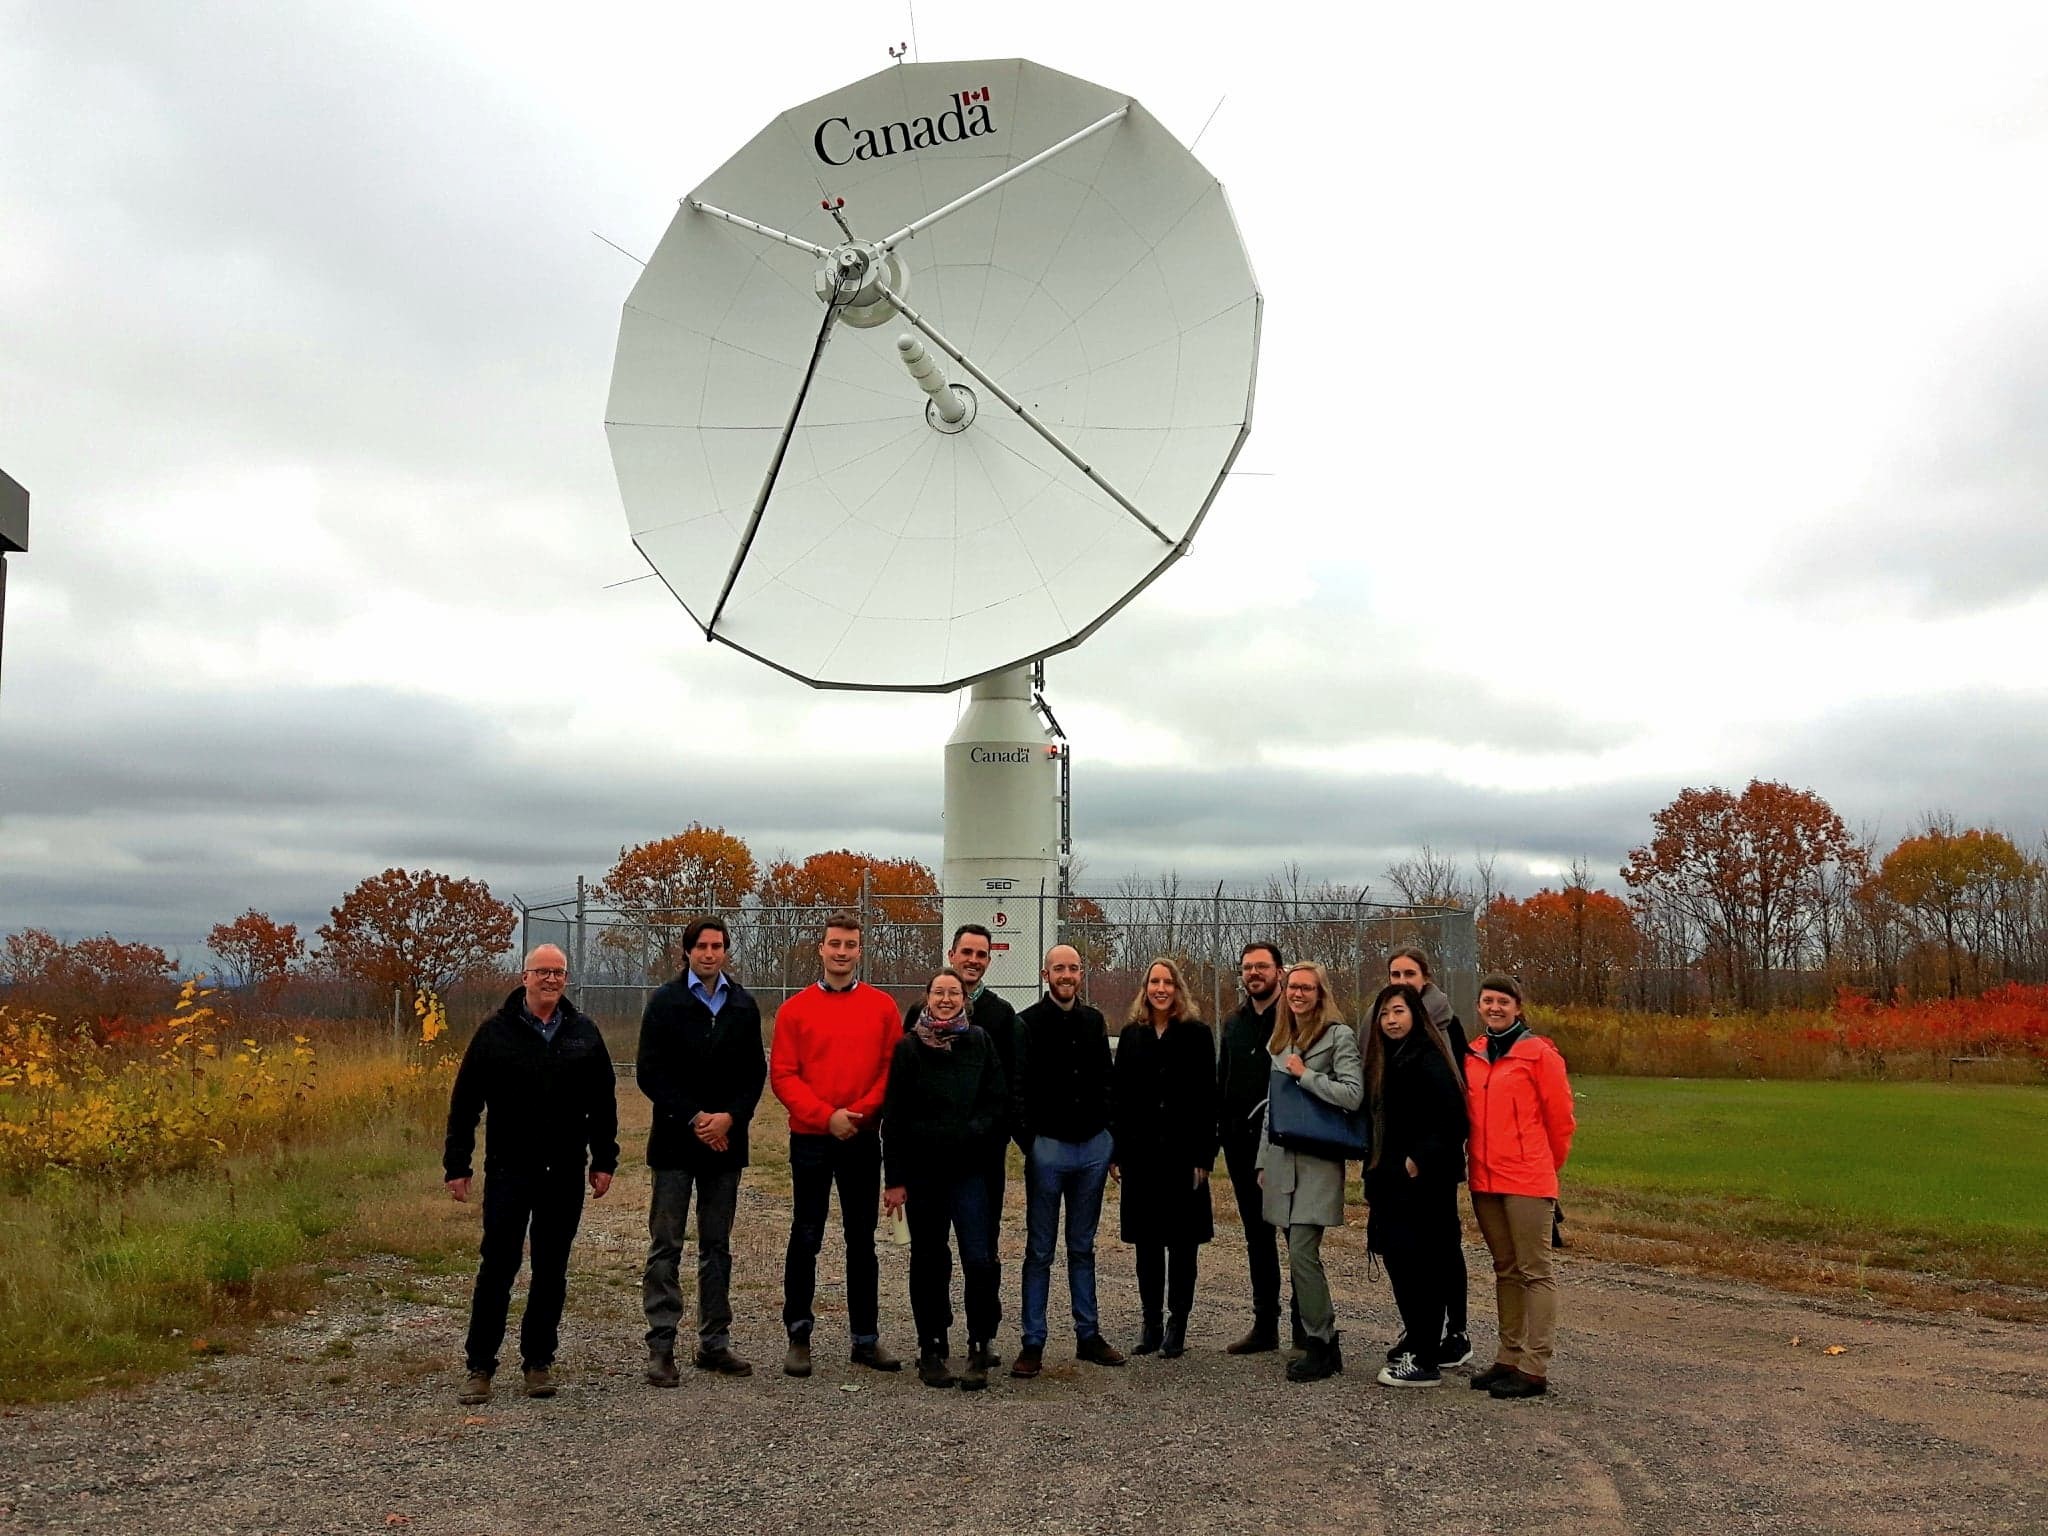 People standing in front of a satellite dish